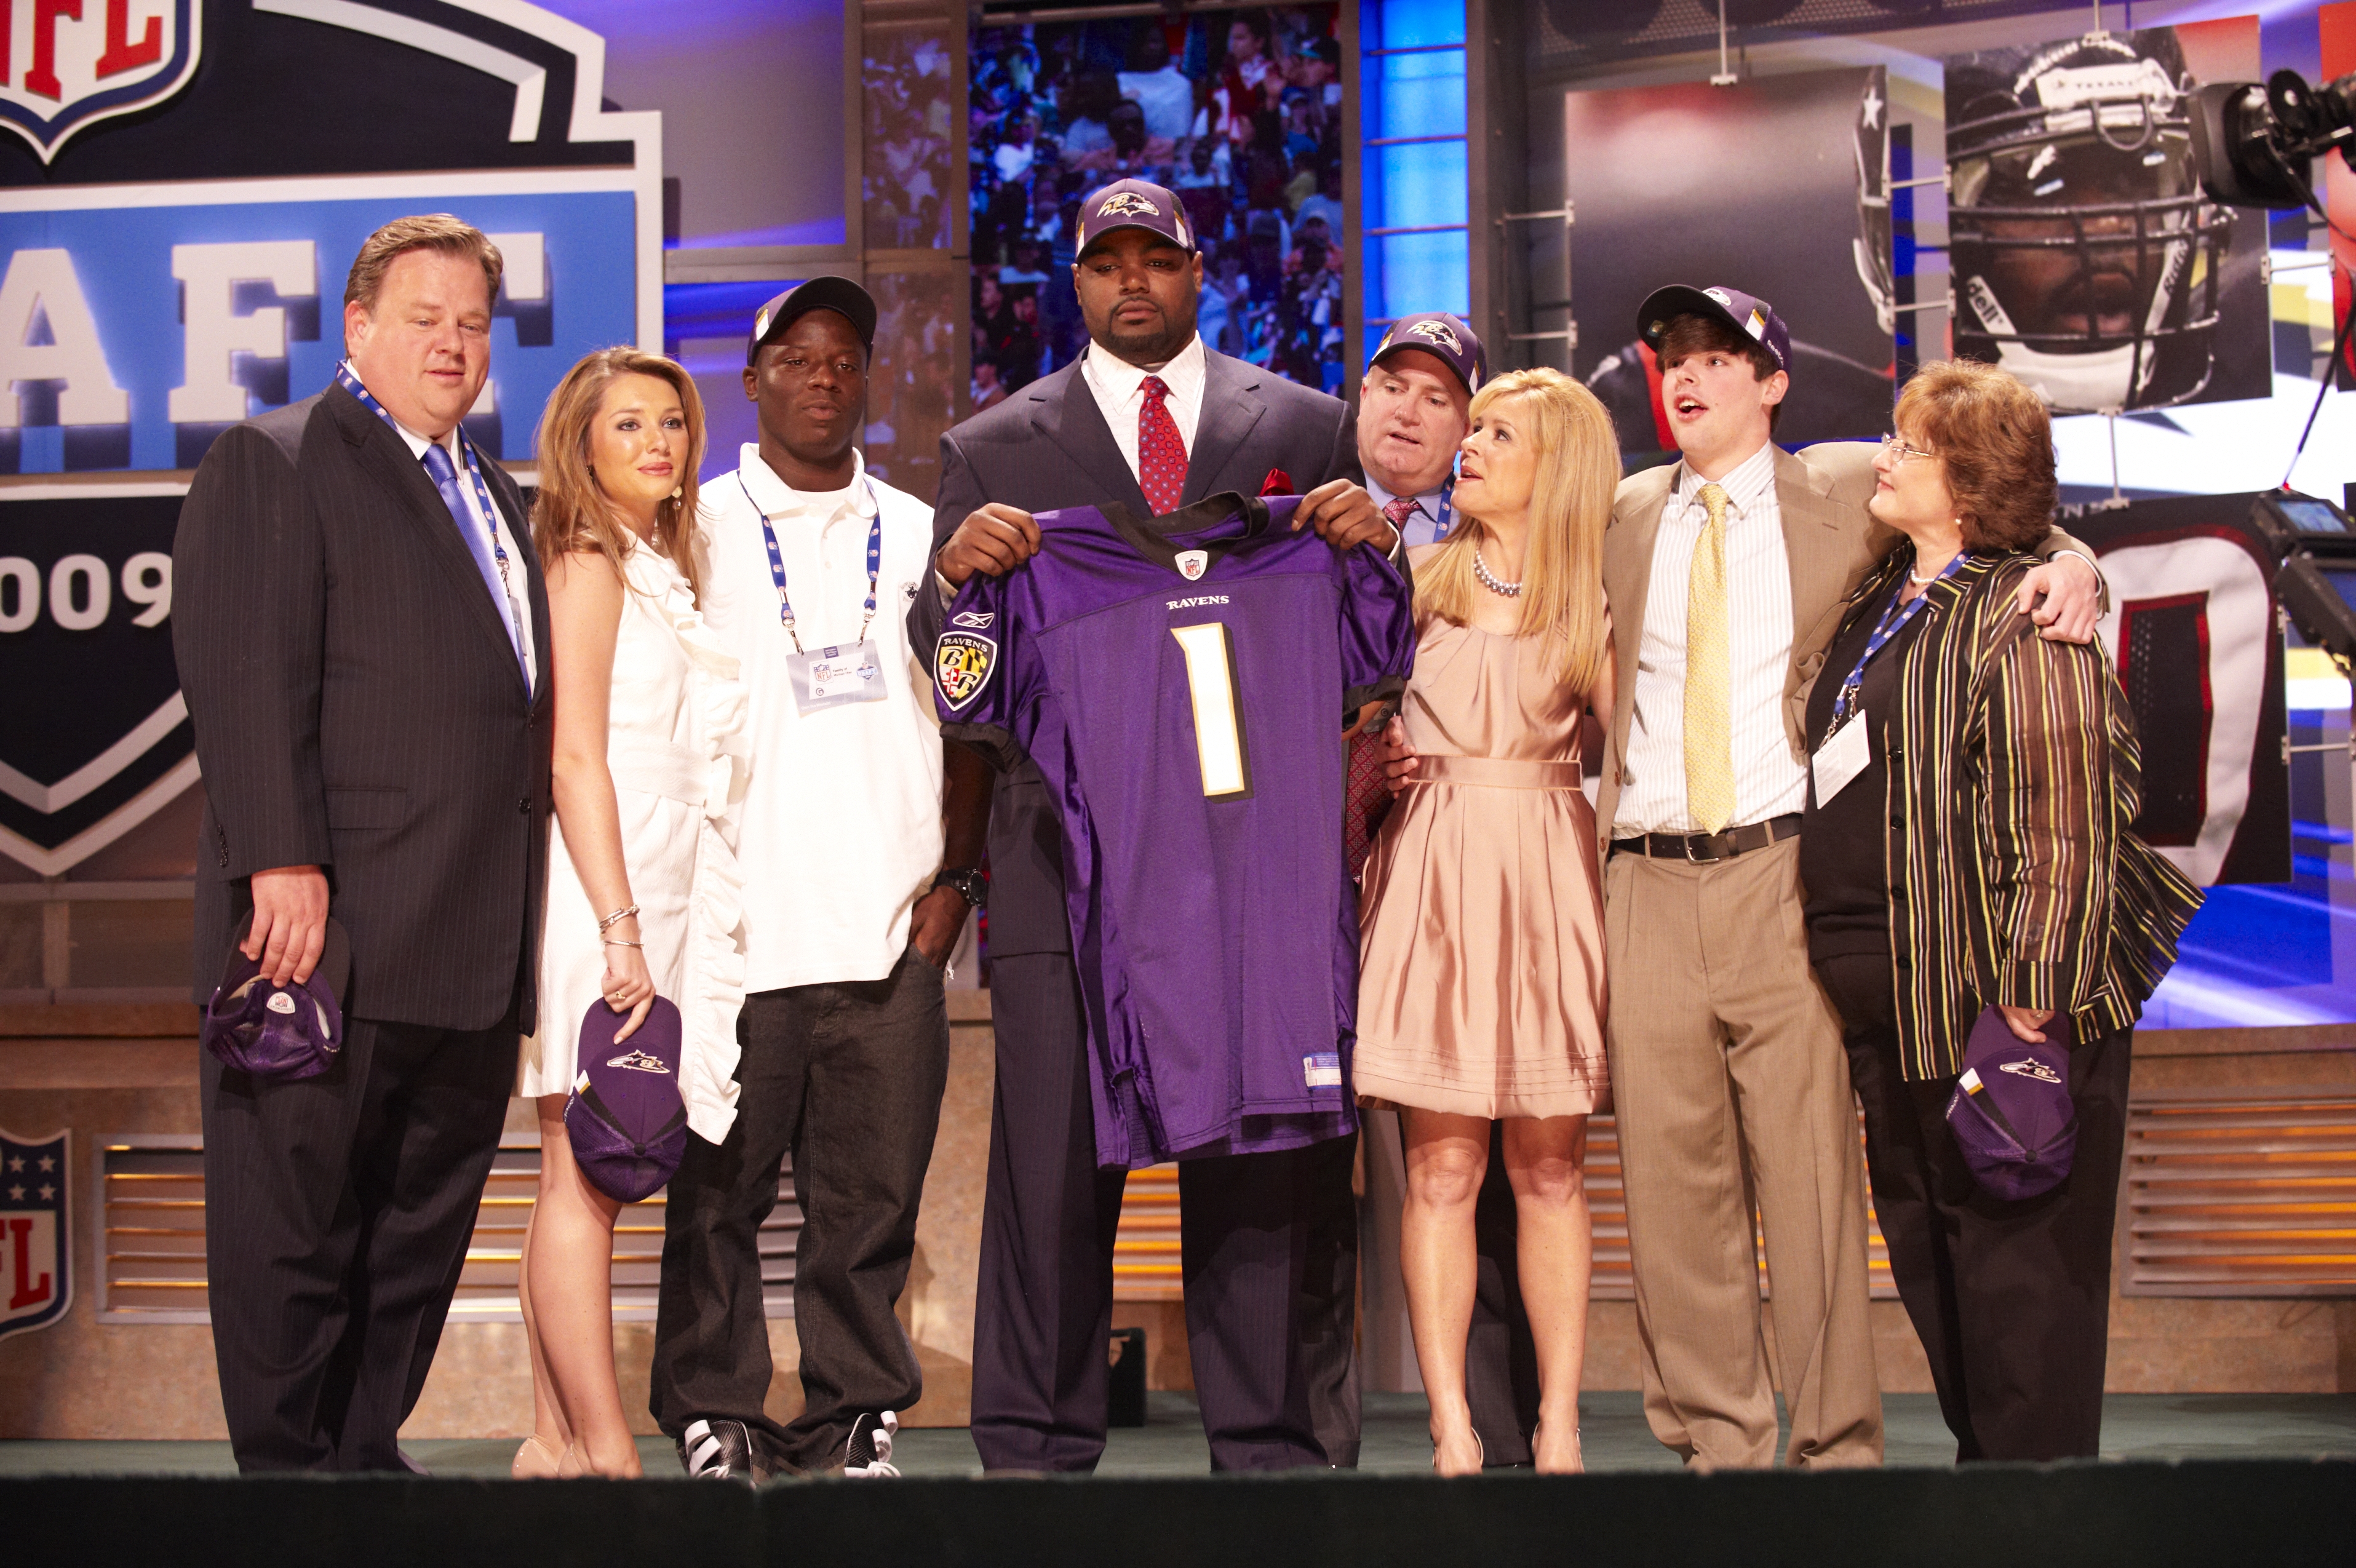 Michael Oher with his family at Radio City Music Hall for the 2009 NFL Draft on April 25, 2009, in New York City. | Source: Getty Images